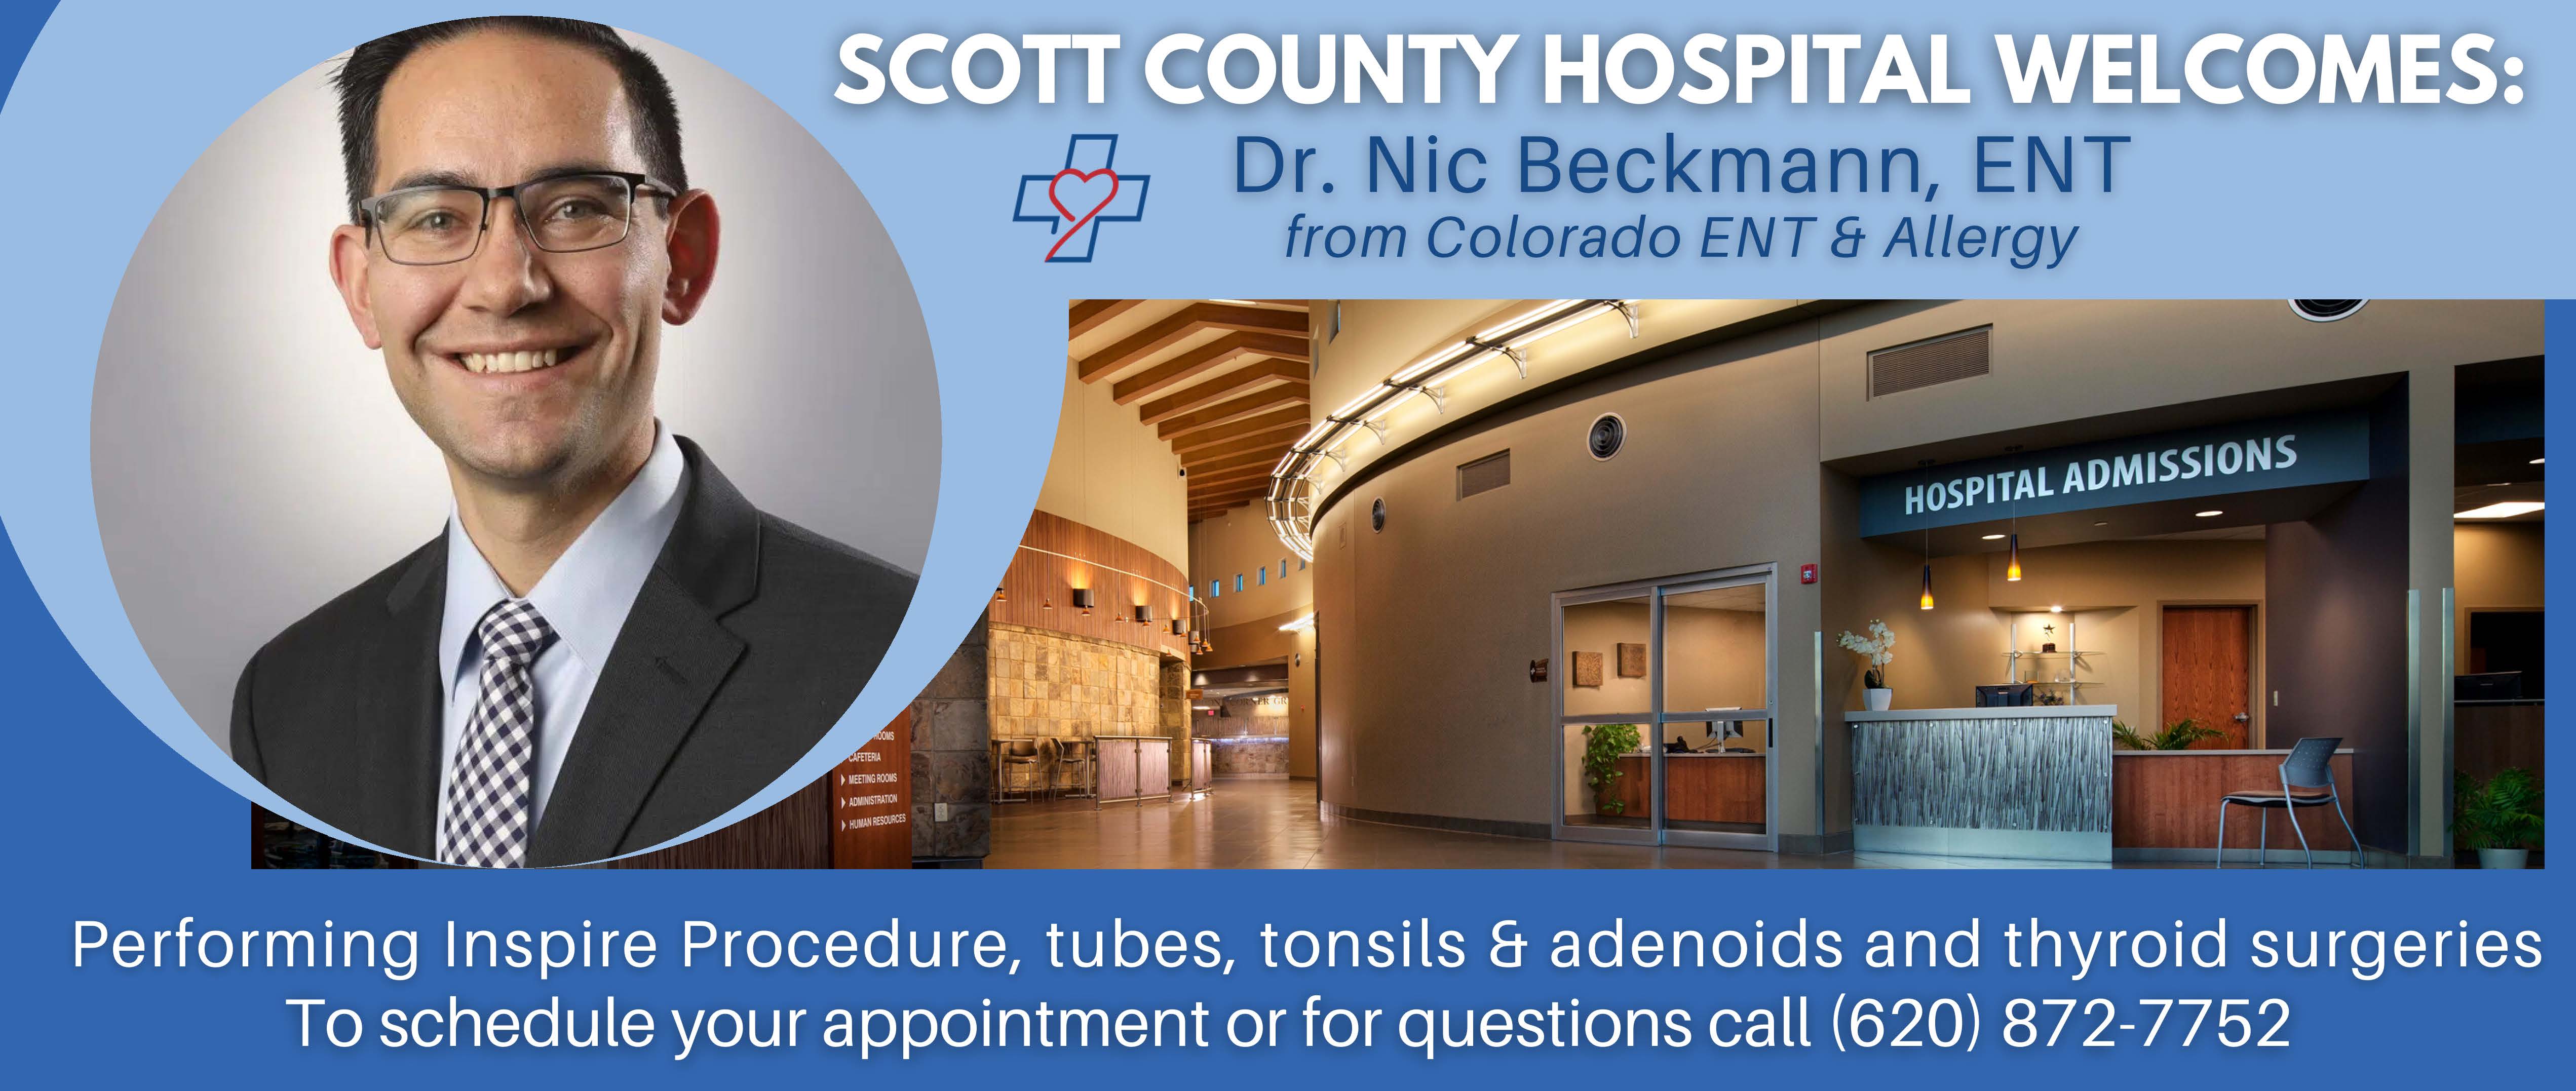 Scott County Hospital welcomes Dr. Nic Beckmann, ENT. Appointments or Questions? Call (620)872-7752